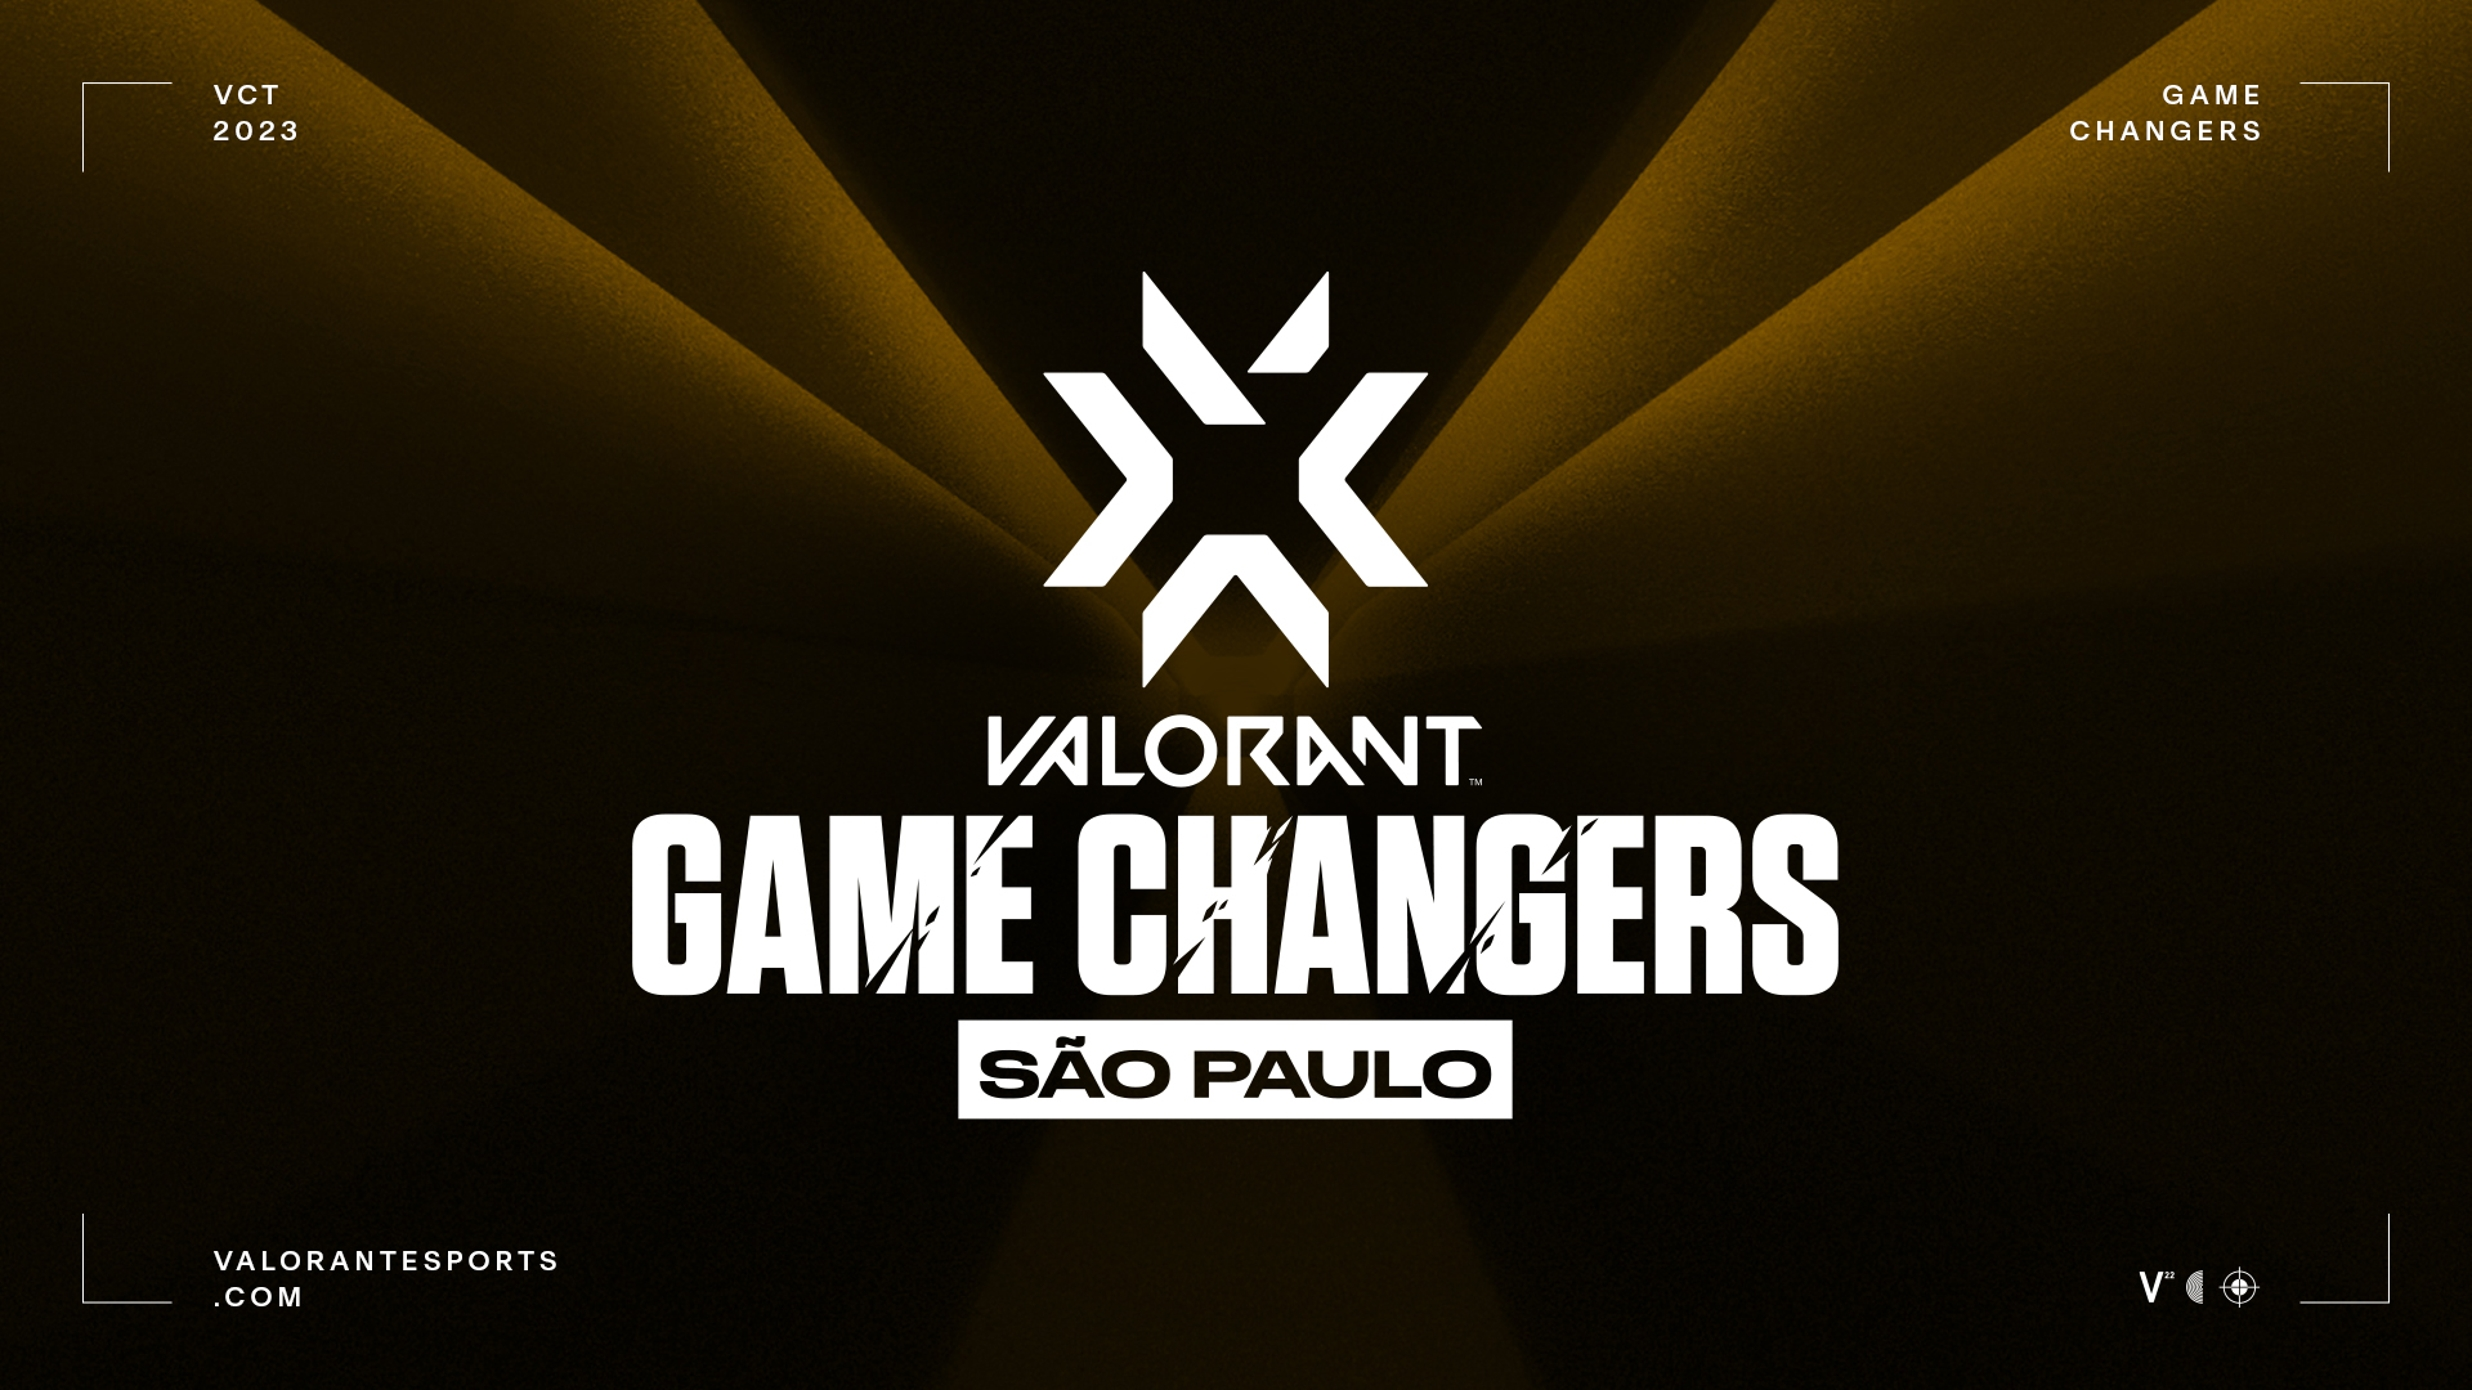 VCT 2023 Game Changers Championship is coming to São Paulo